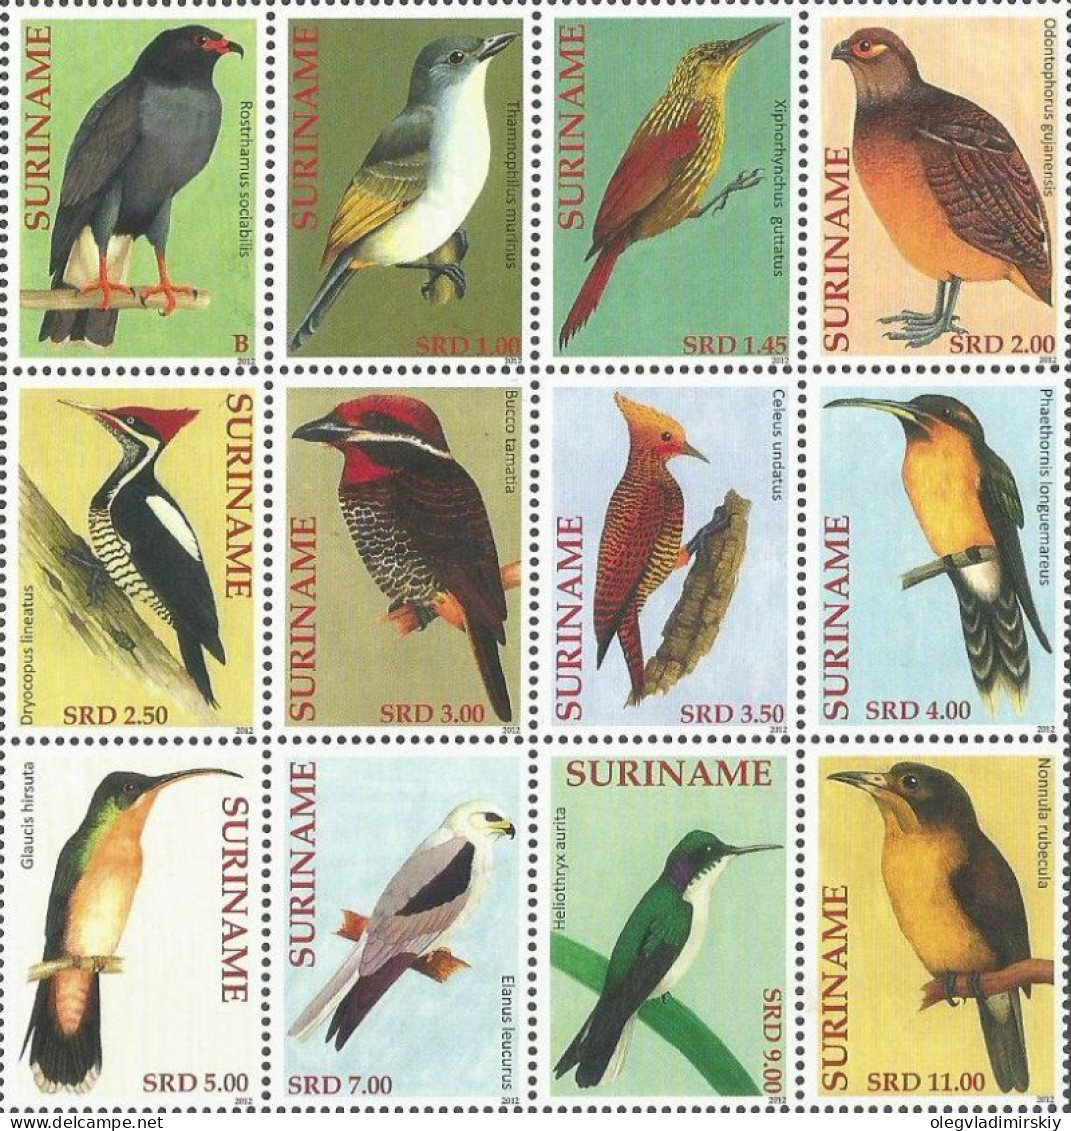 Suriname Surinam 2012 Tropical Forest Birds Set Of 12 Stamps In Block 3x4 MNH - Pájaros Cantores (Passeri)